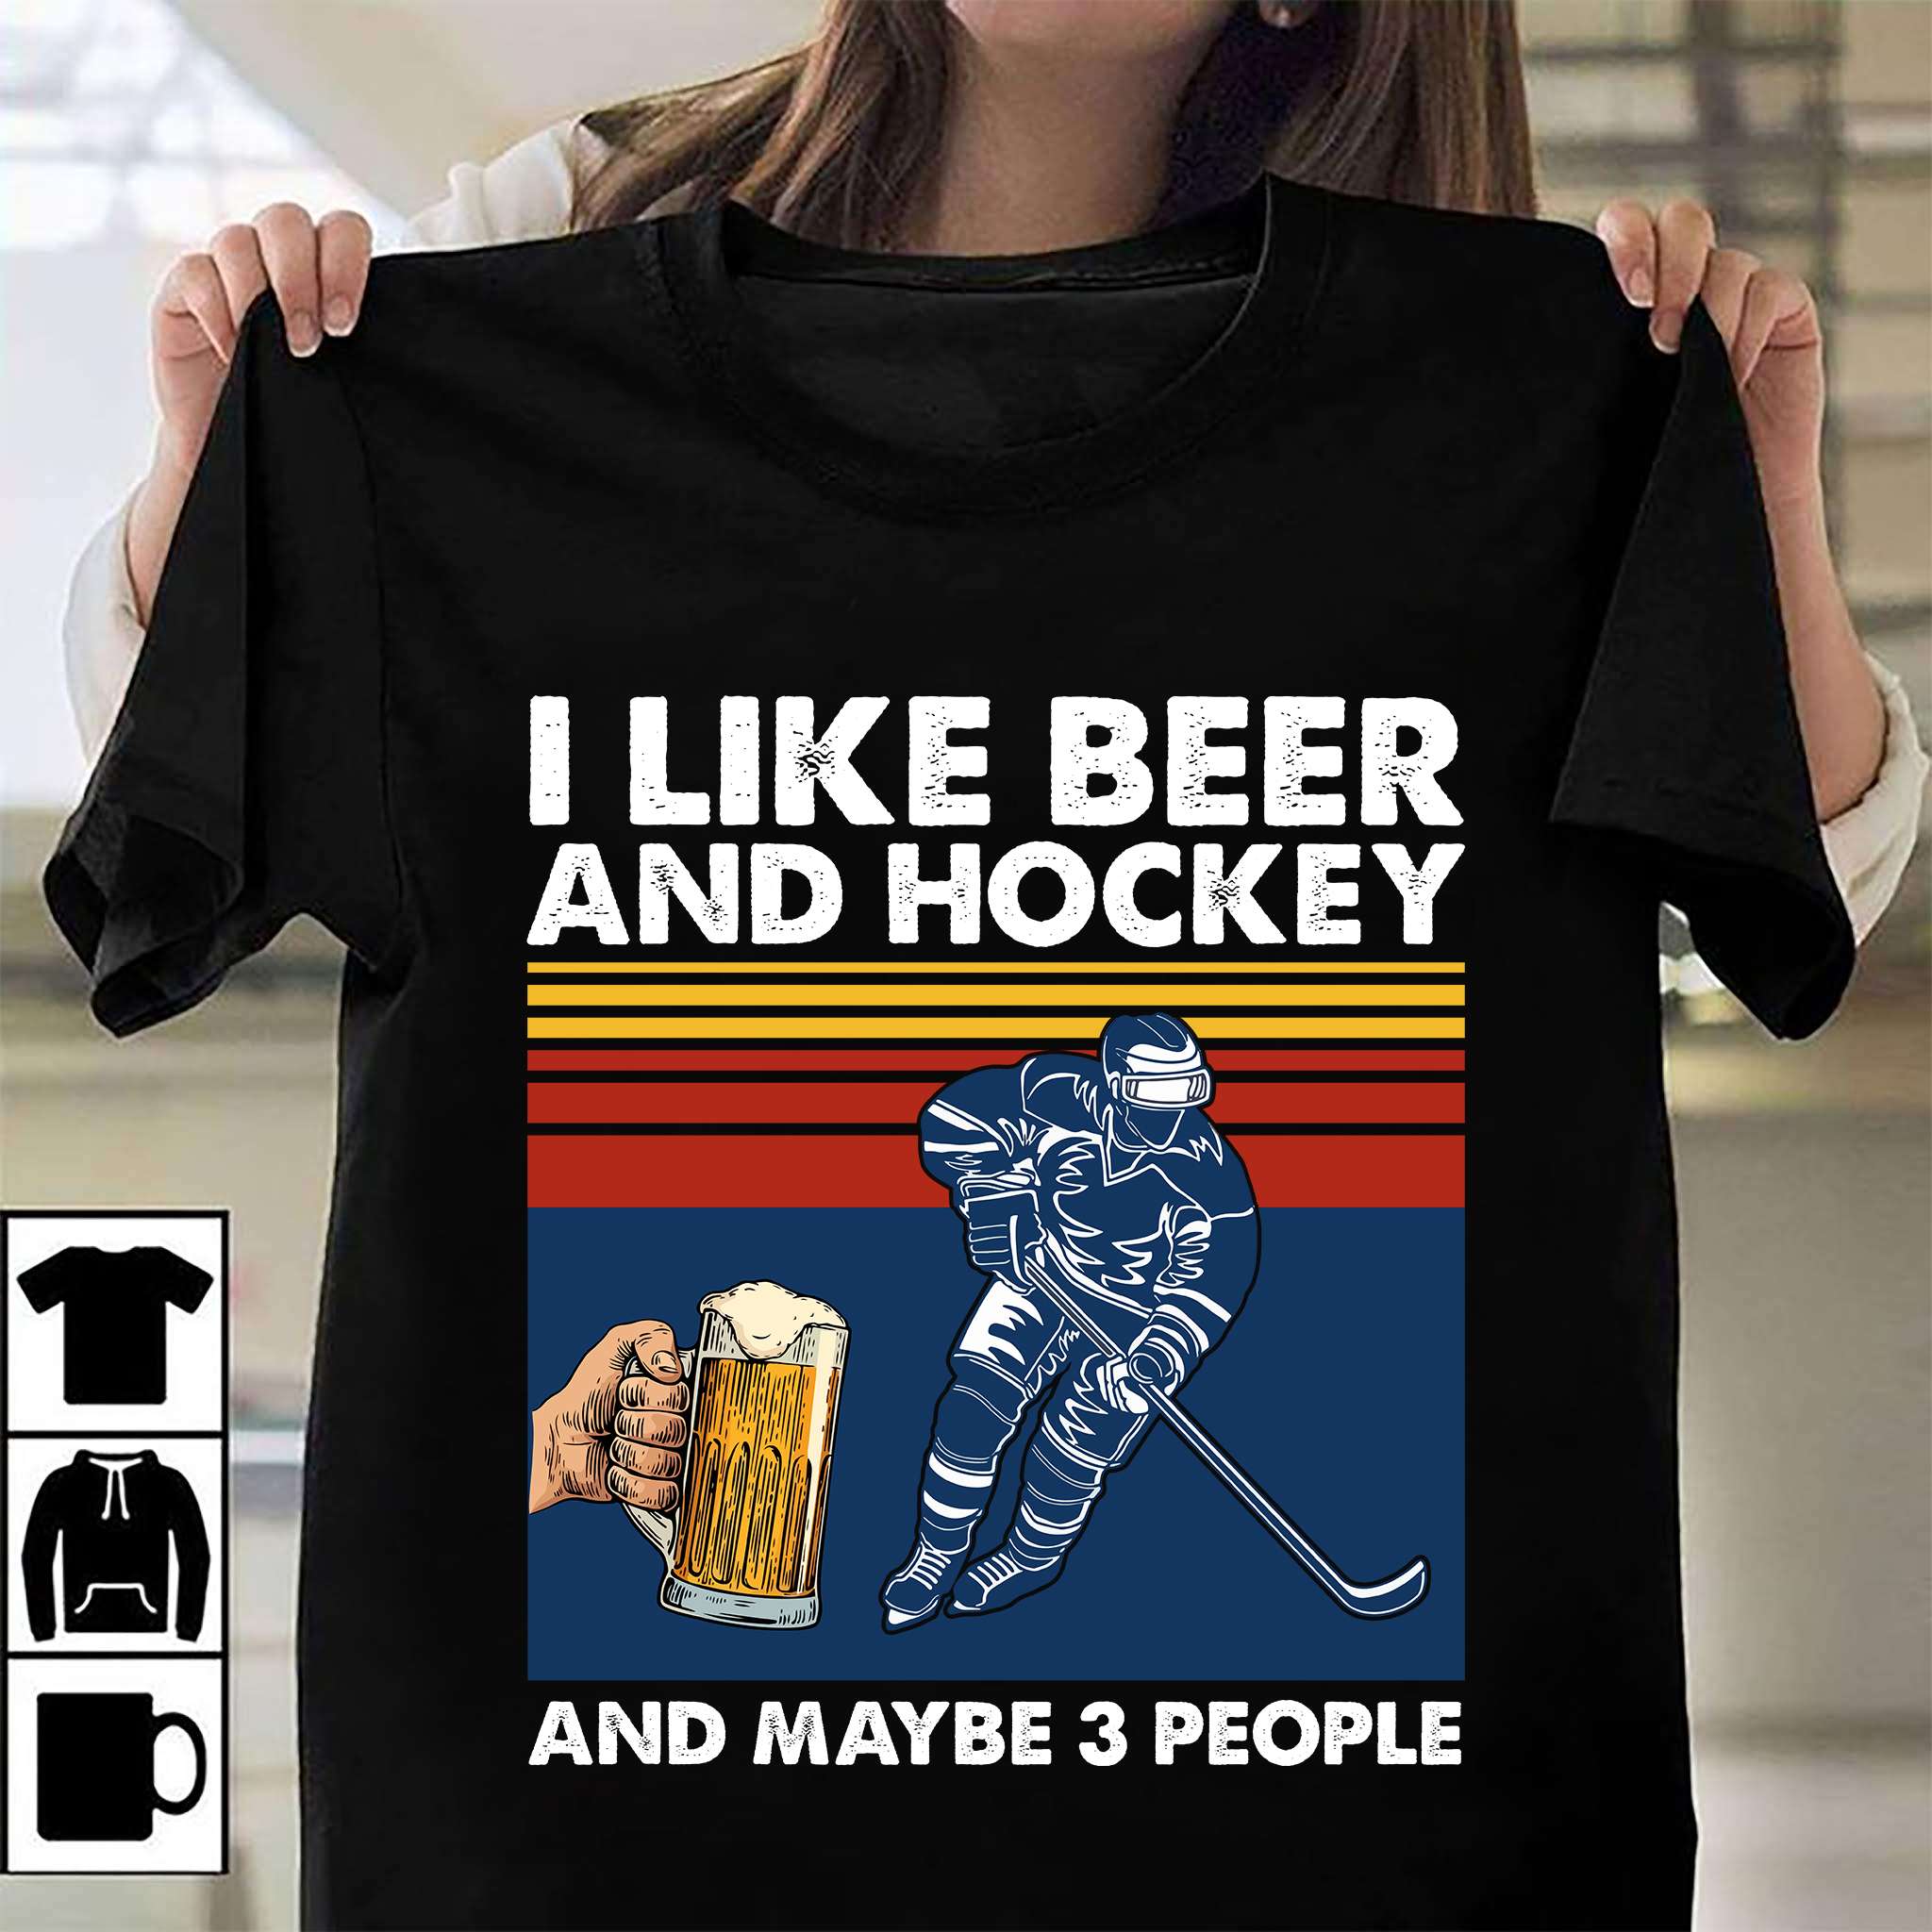 I like beer and hockey and maybe 3 people - Hockey the sport, cup of beer